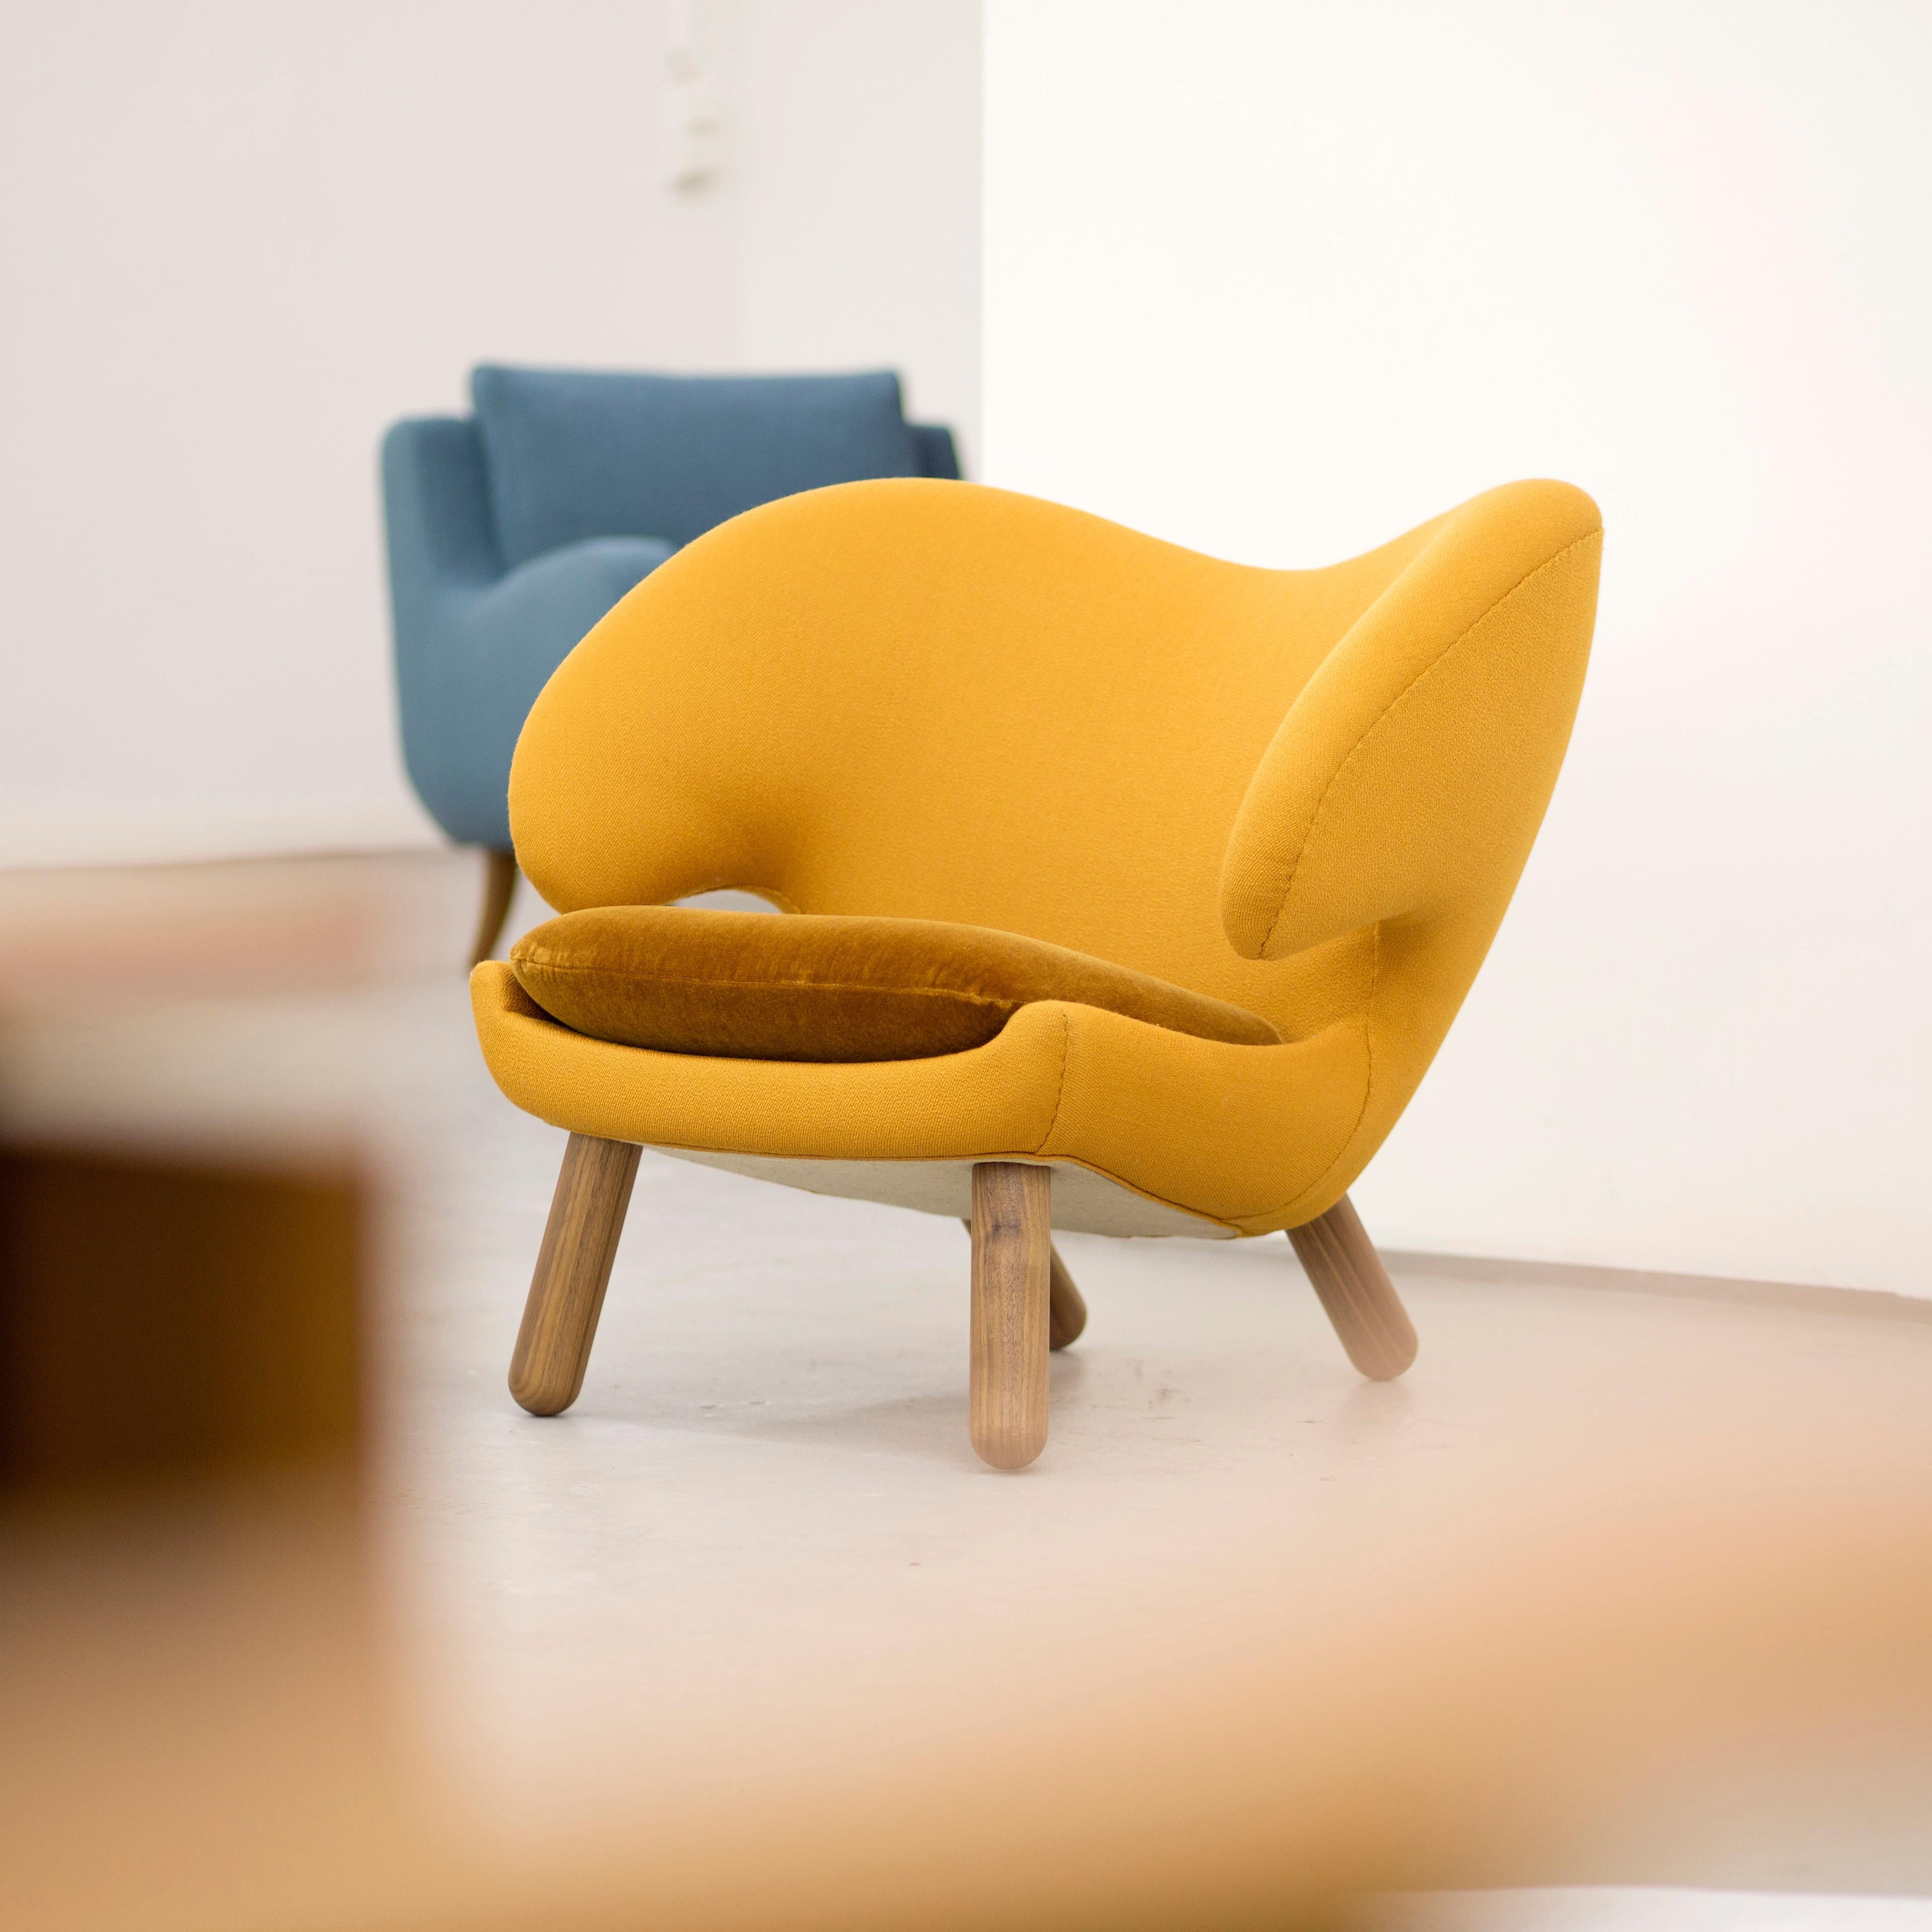 Pelican chair designed by Finn Juhl in 1940.
Manufactured by House of Finn Juhl in Denmark.

Pelican chair was probably the one furthest ahead of its time. When it was presented at the Copenhagen Cabinetmakers’ Guild Exhibition in 1940, it stood